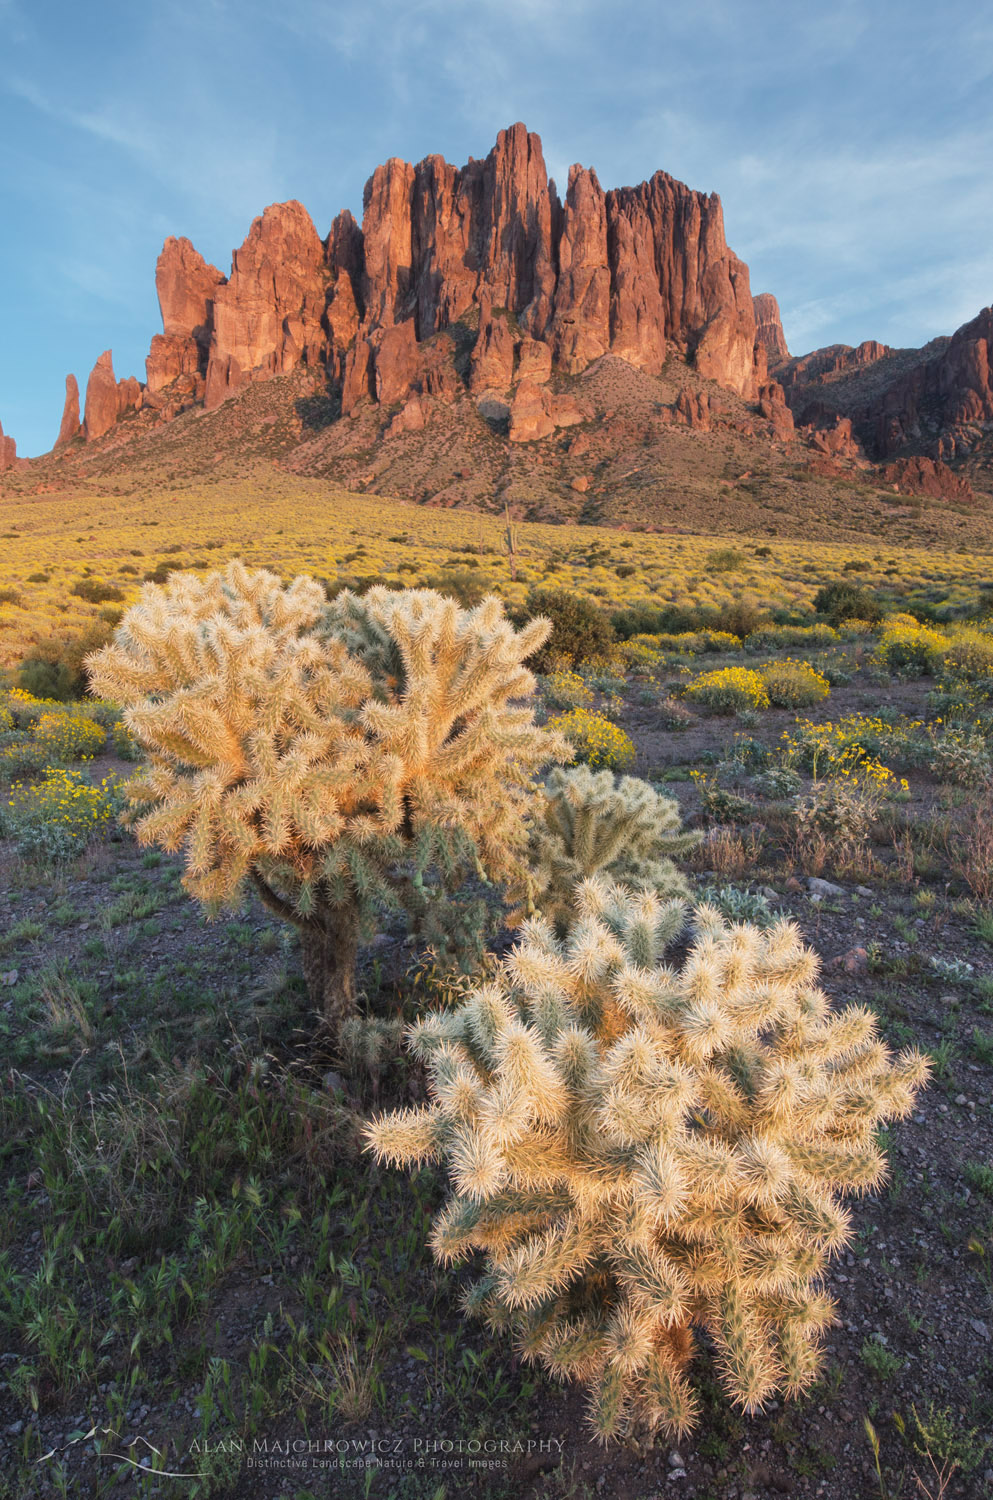 Superstition Mountains, Arizona, Jumping Cholla (Cylindropuntia fulgida) in the foreground #56898